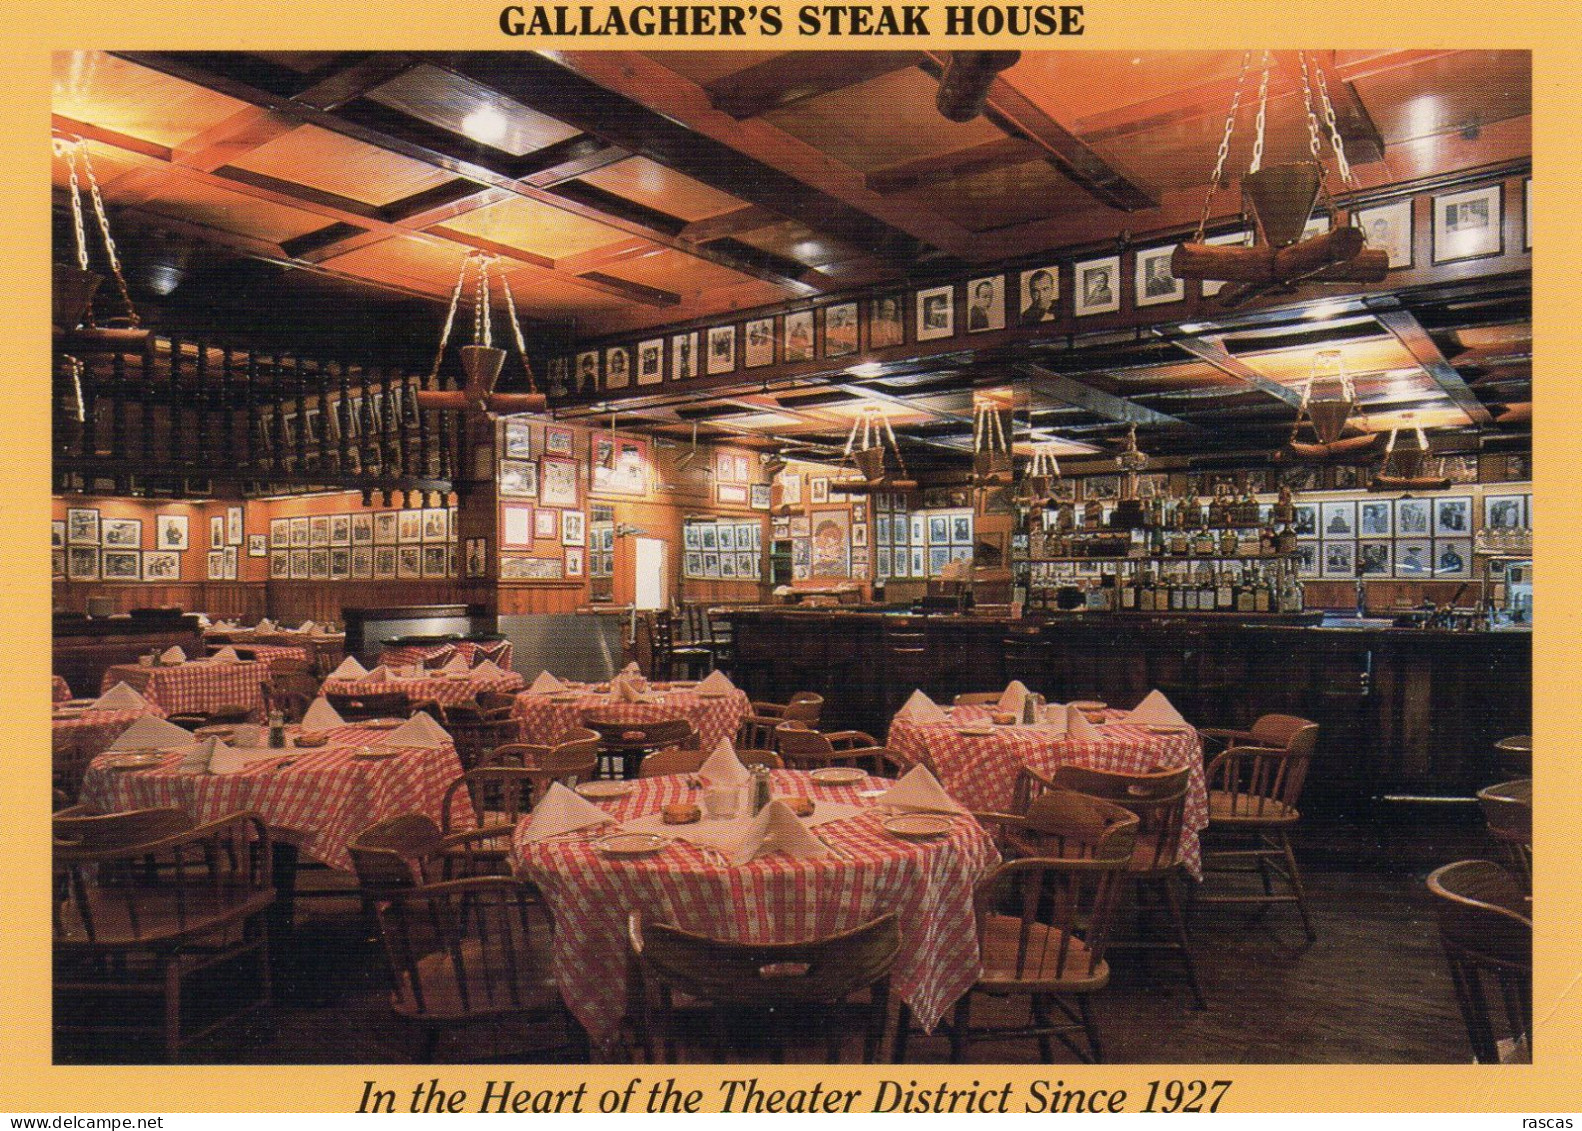 CPM - M - ETATS UNIS - NEW YORK - GALLAGHER'S STEAK HOUSE - 228 WEST 52nd STREET - IN THE HEART OF THE THEATRE DISTRICT - Cafes, Hotels & Restaurants